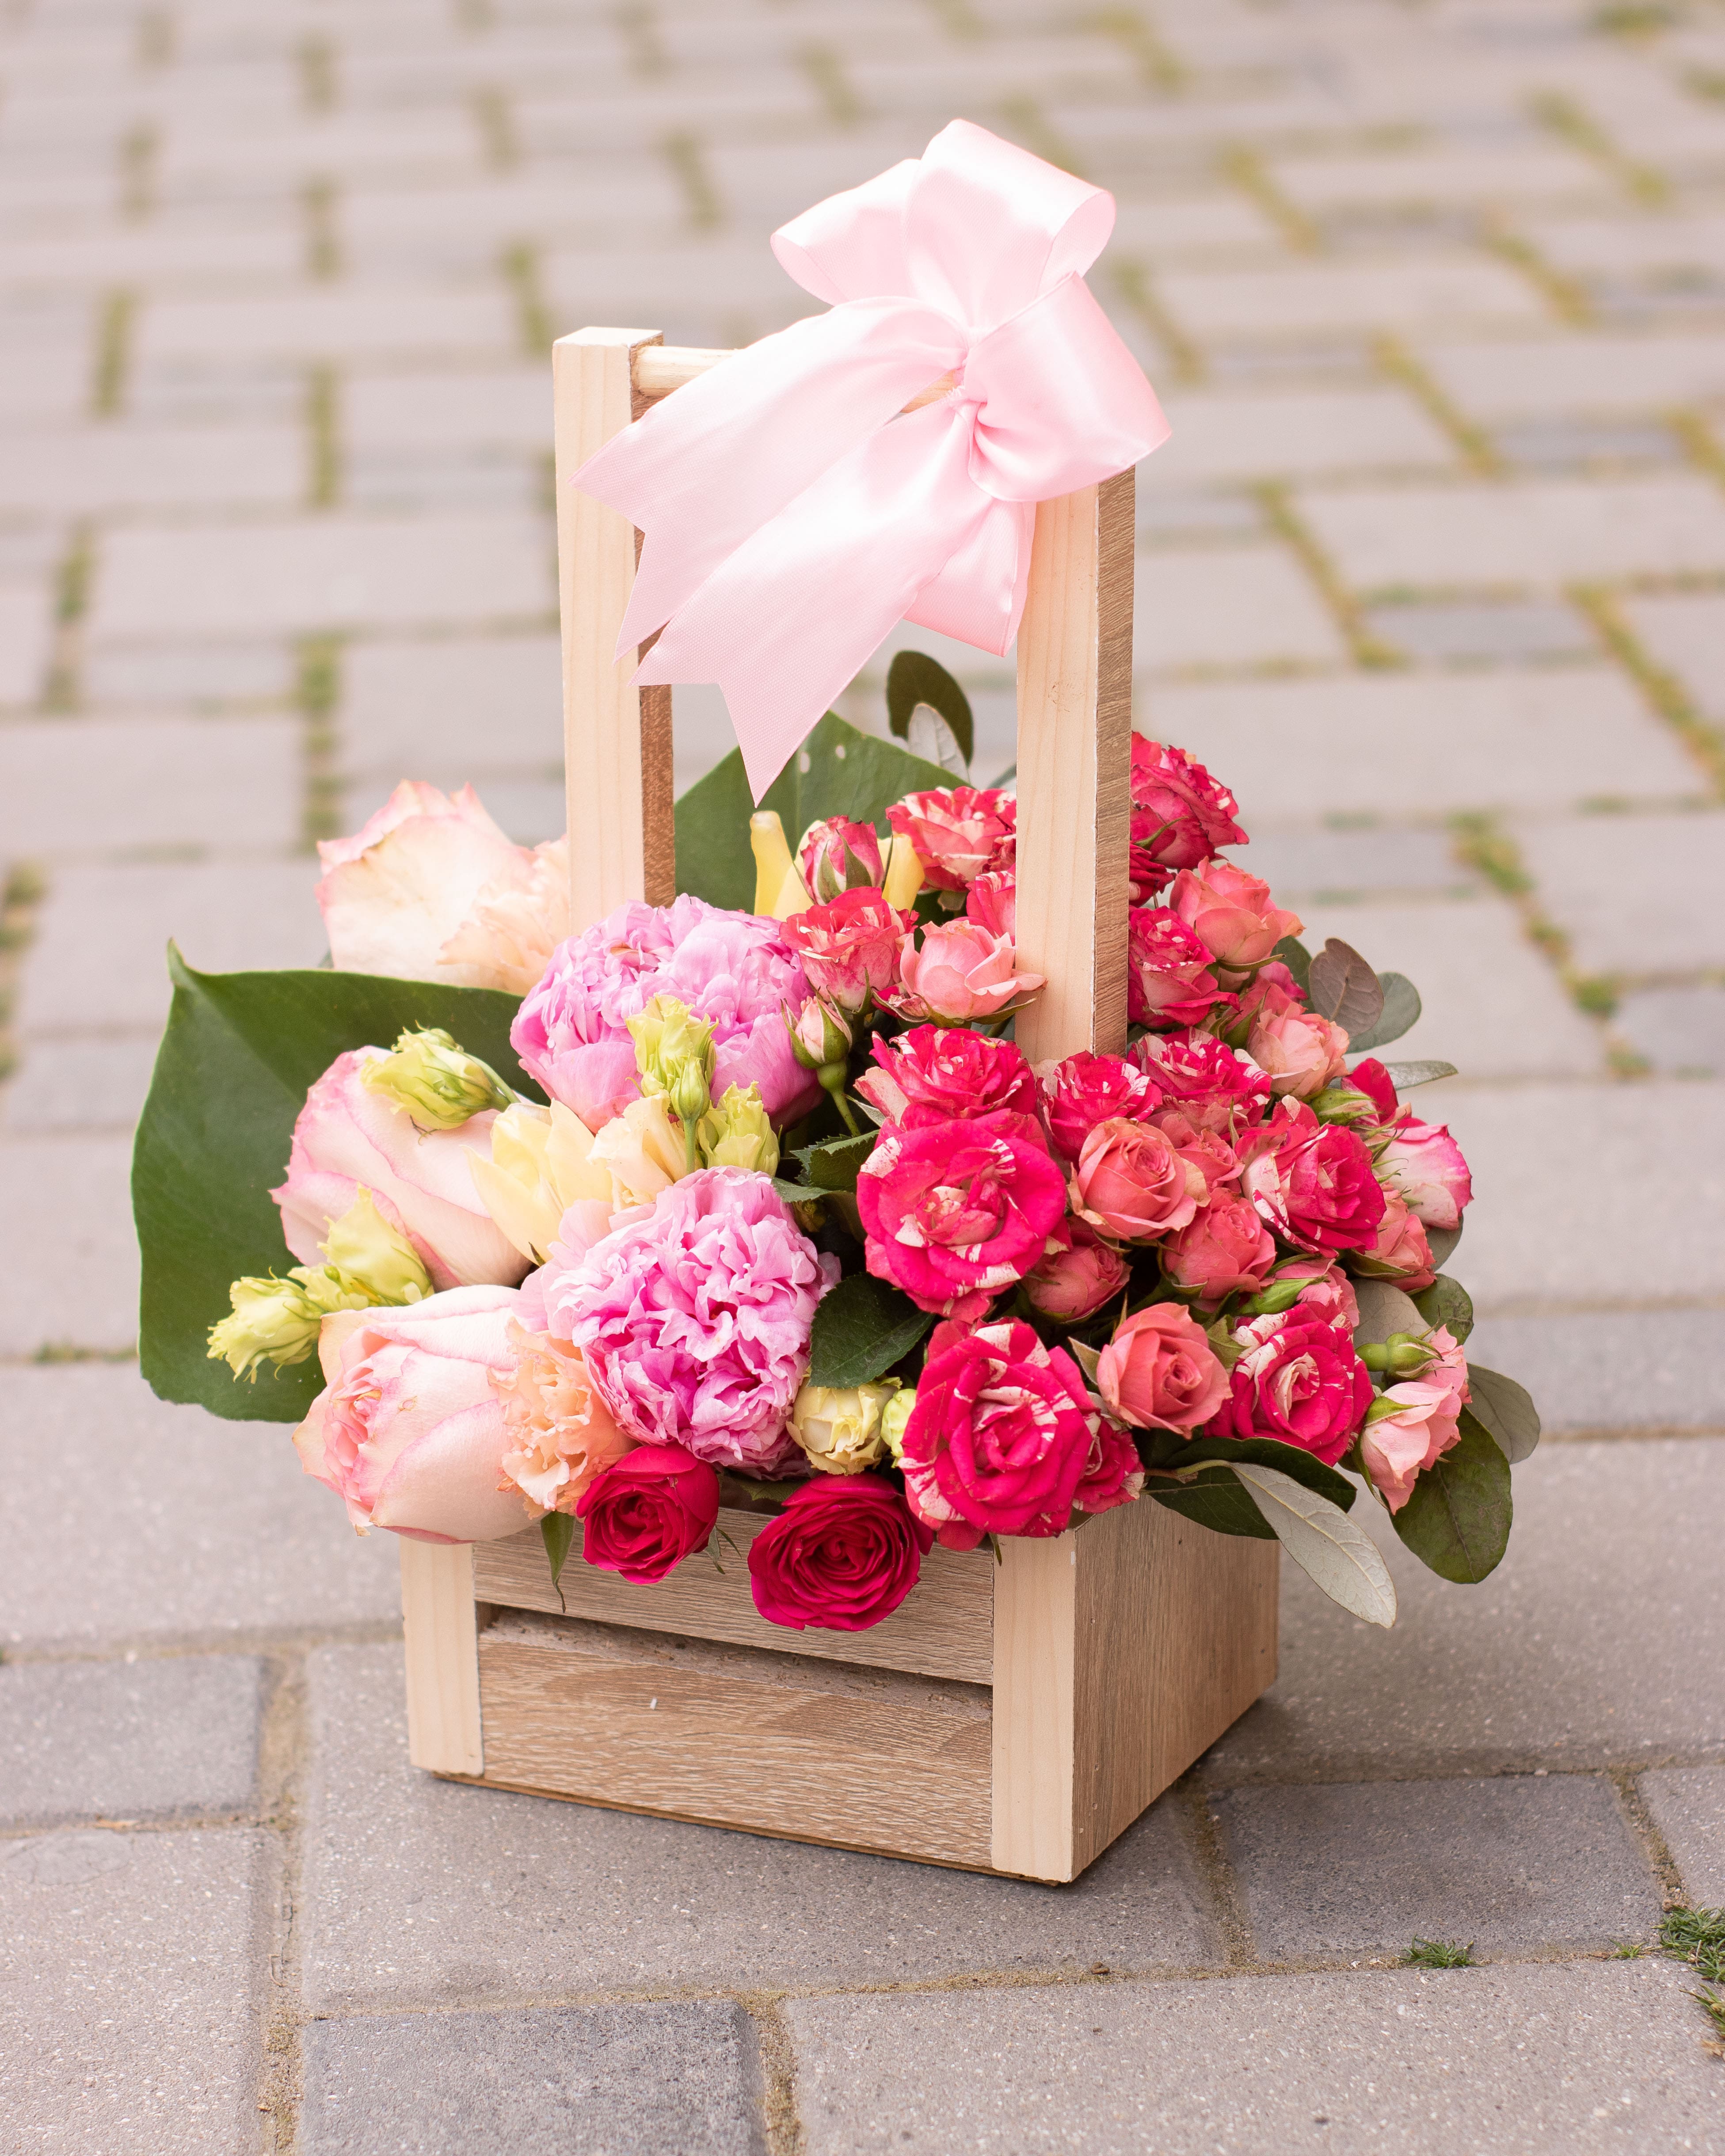 Shrub roses in a basket